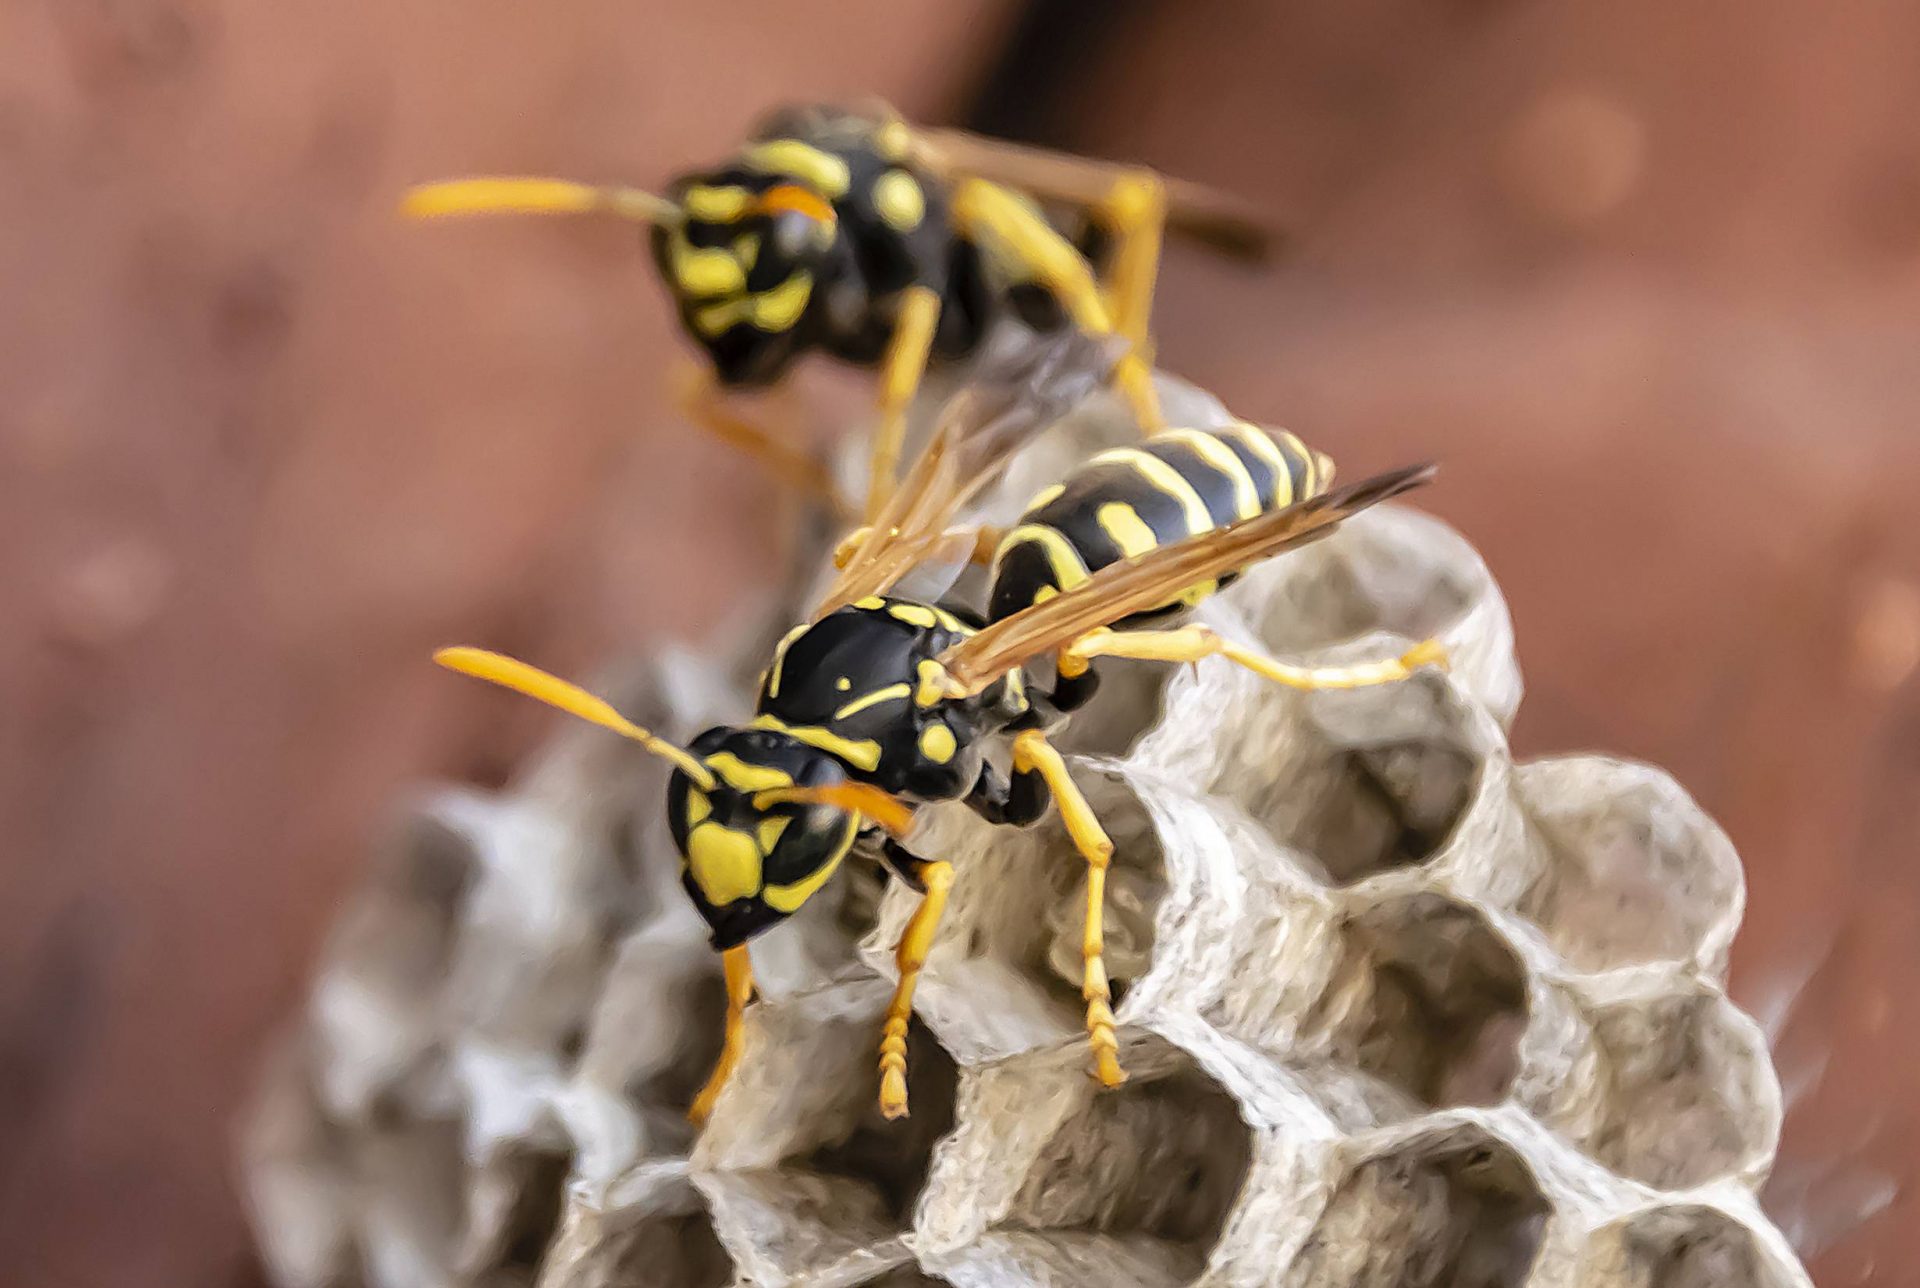 Stinging wasps are so vital extra well-known than you trace – here’s why